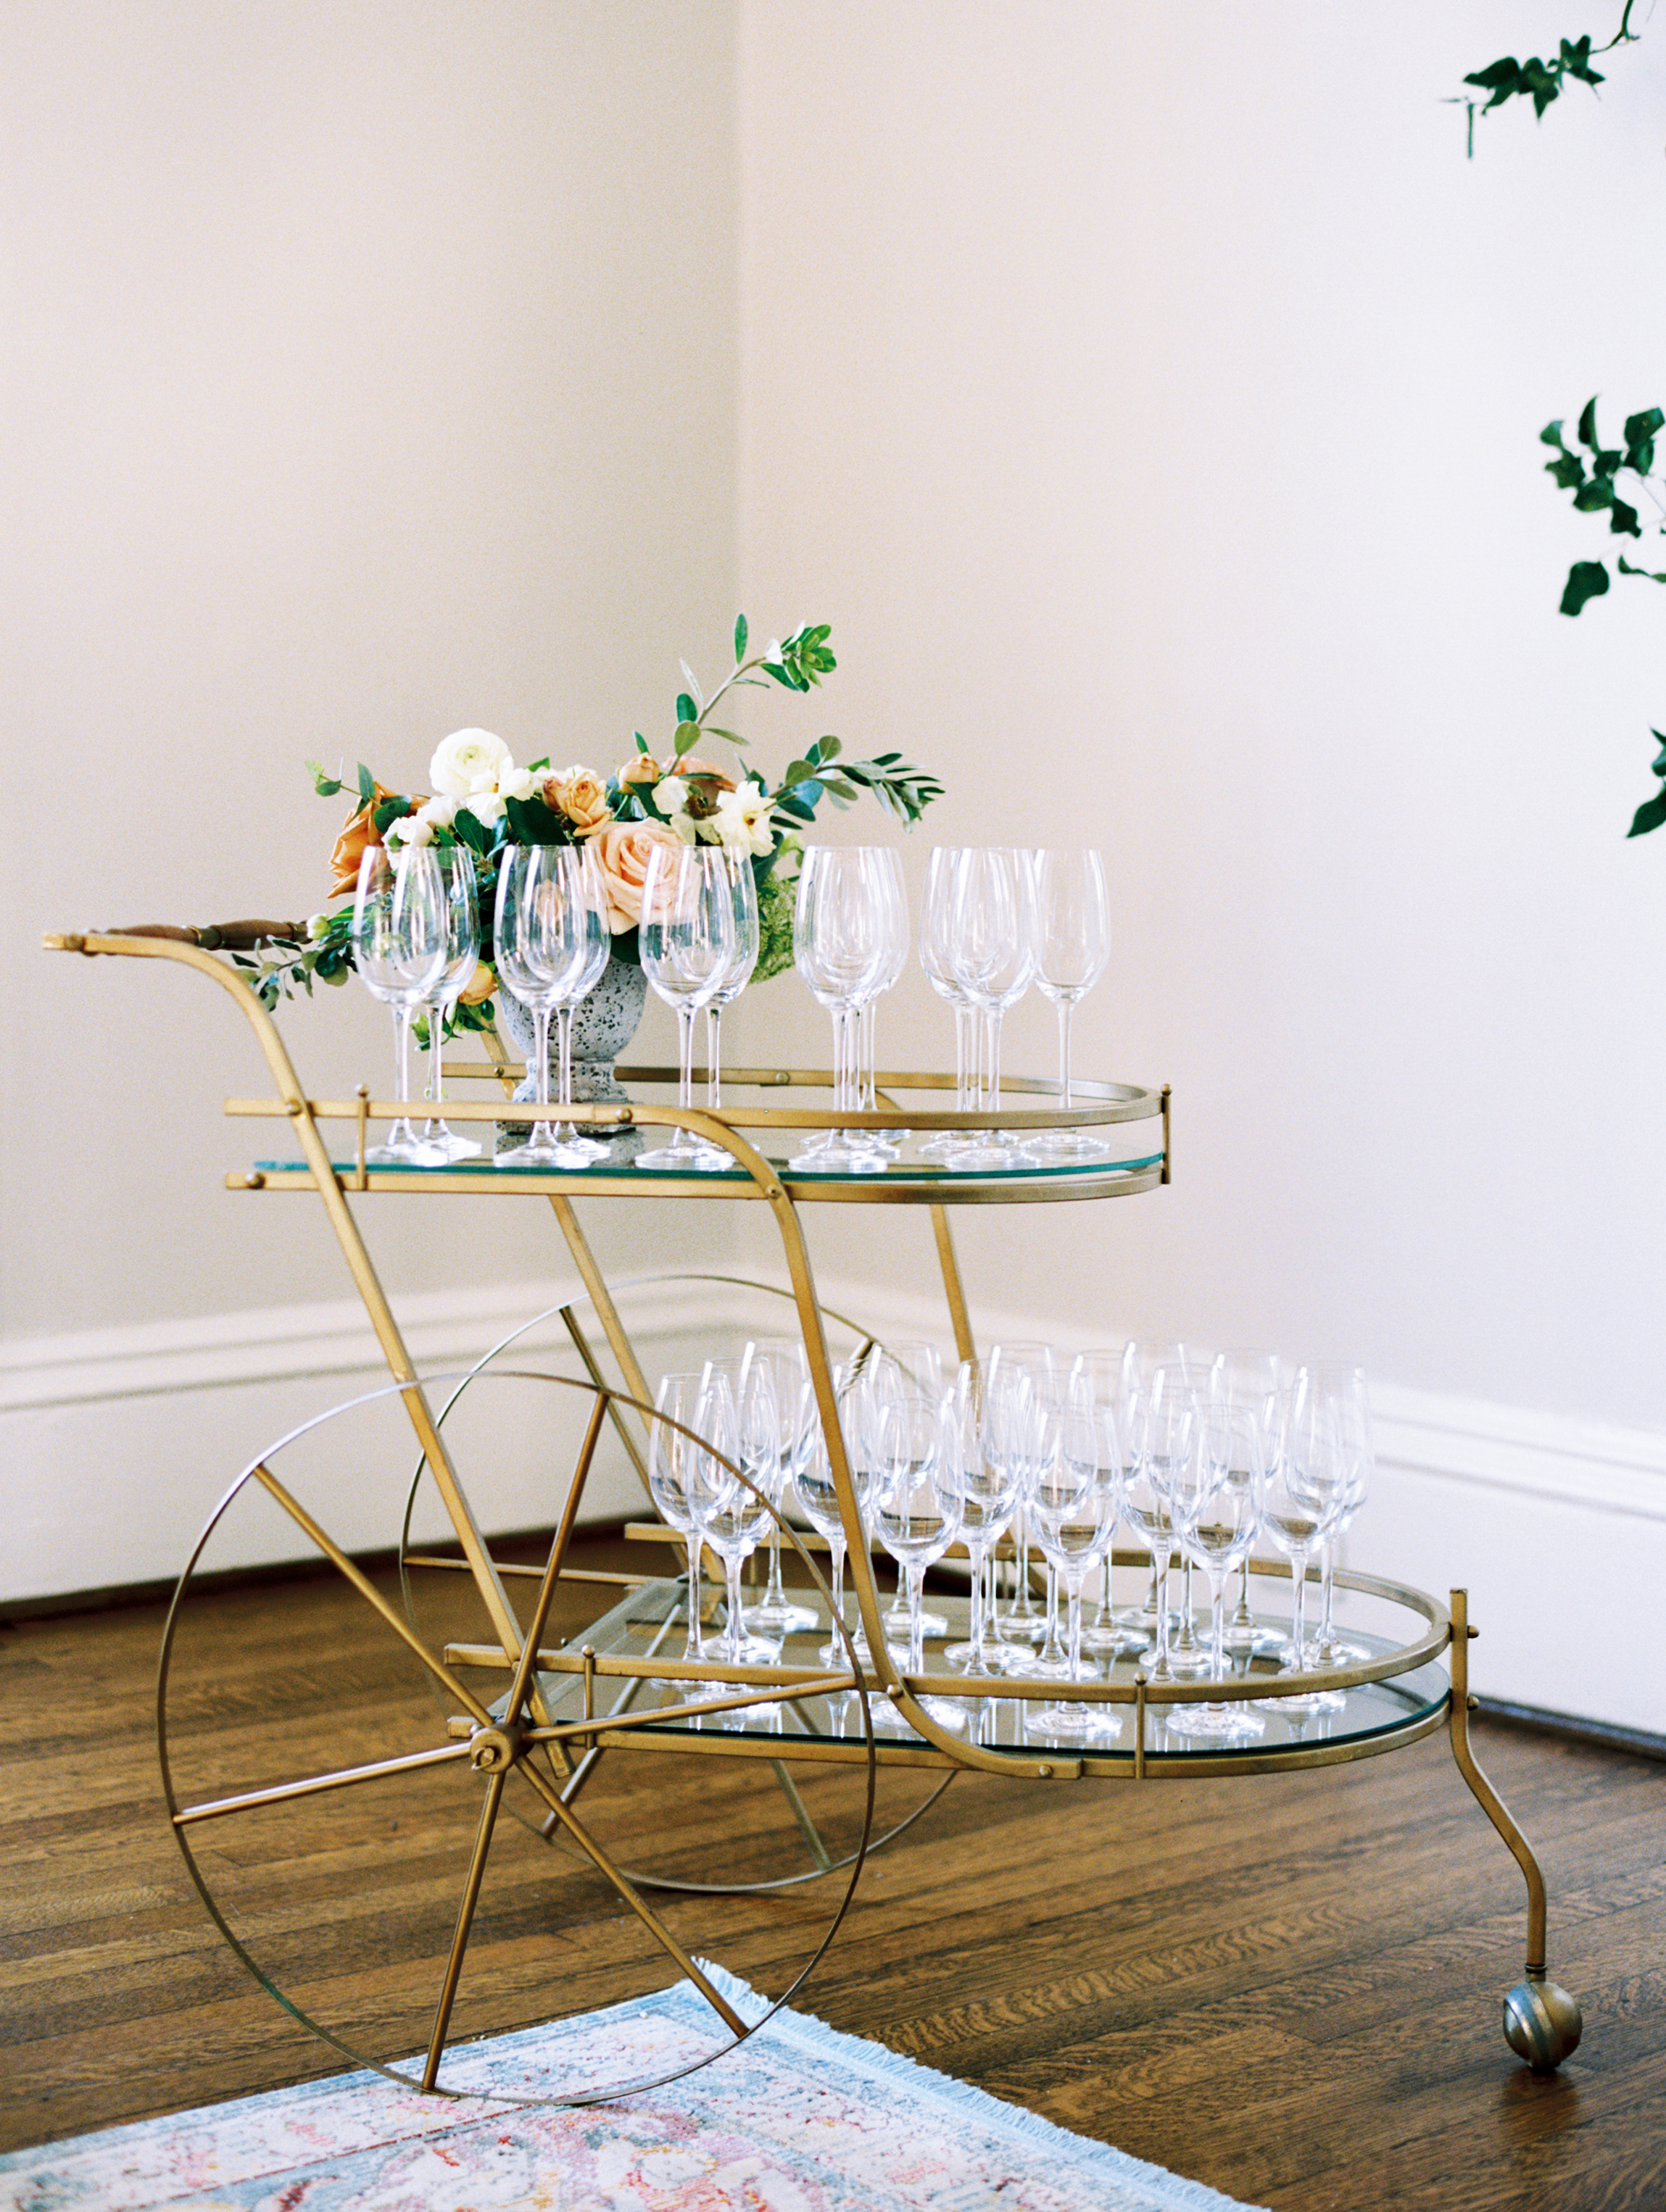 Vintage bar cart for mimosa bar | Greenhouse Picker Sisters in Raleigh, NC | Venue: McAlister-Leftwich in Greensboro, NC